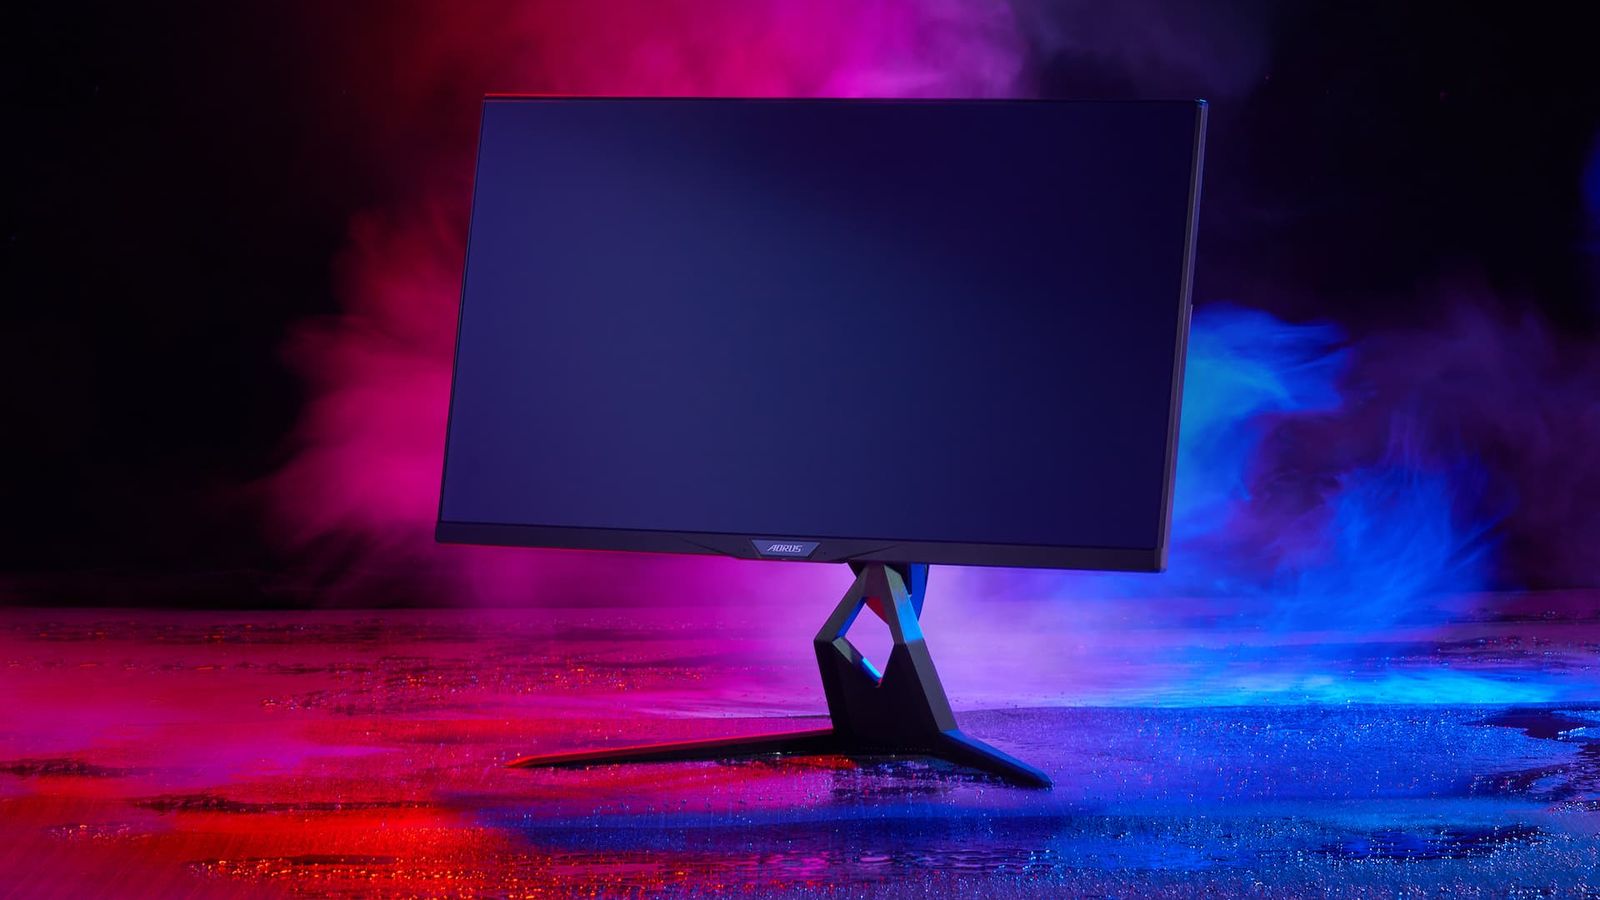 Image of a black gaming monitor surrounded by red and blue lighting and smoke.